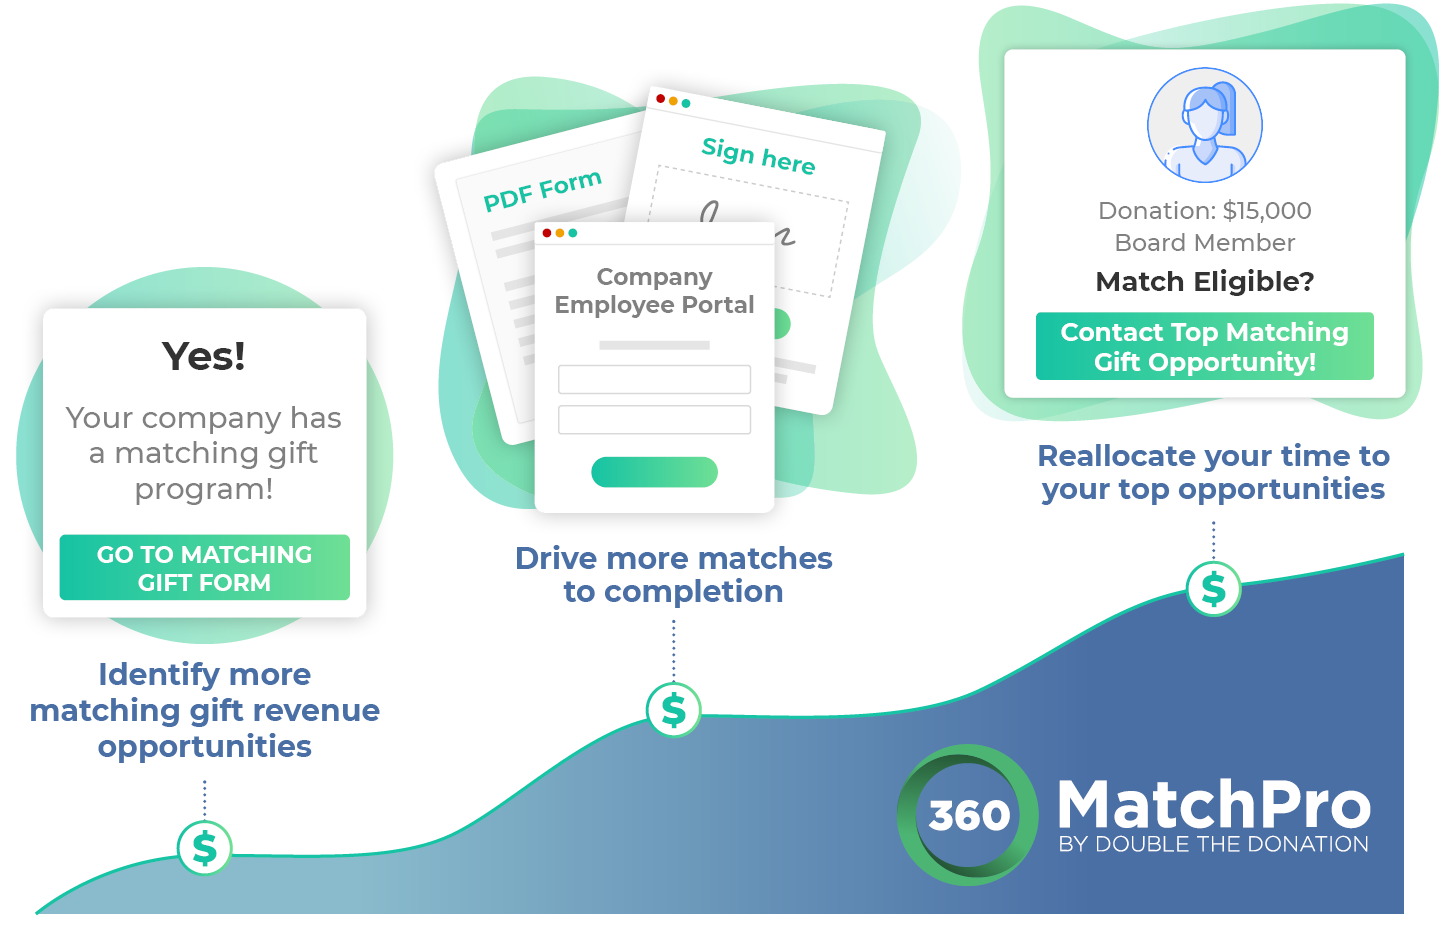 This image shows valuable features of 360MatchPro. It also uses a line graph to represent increasing donations for your organization.